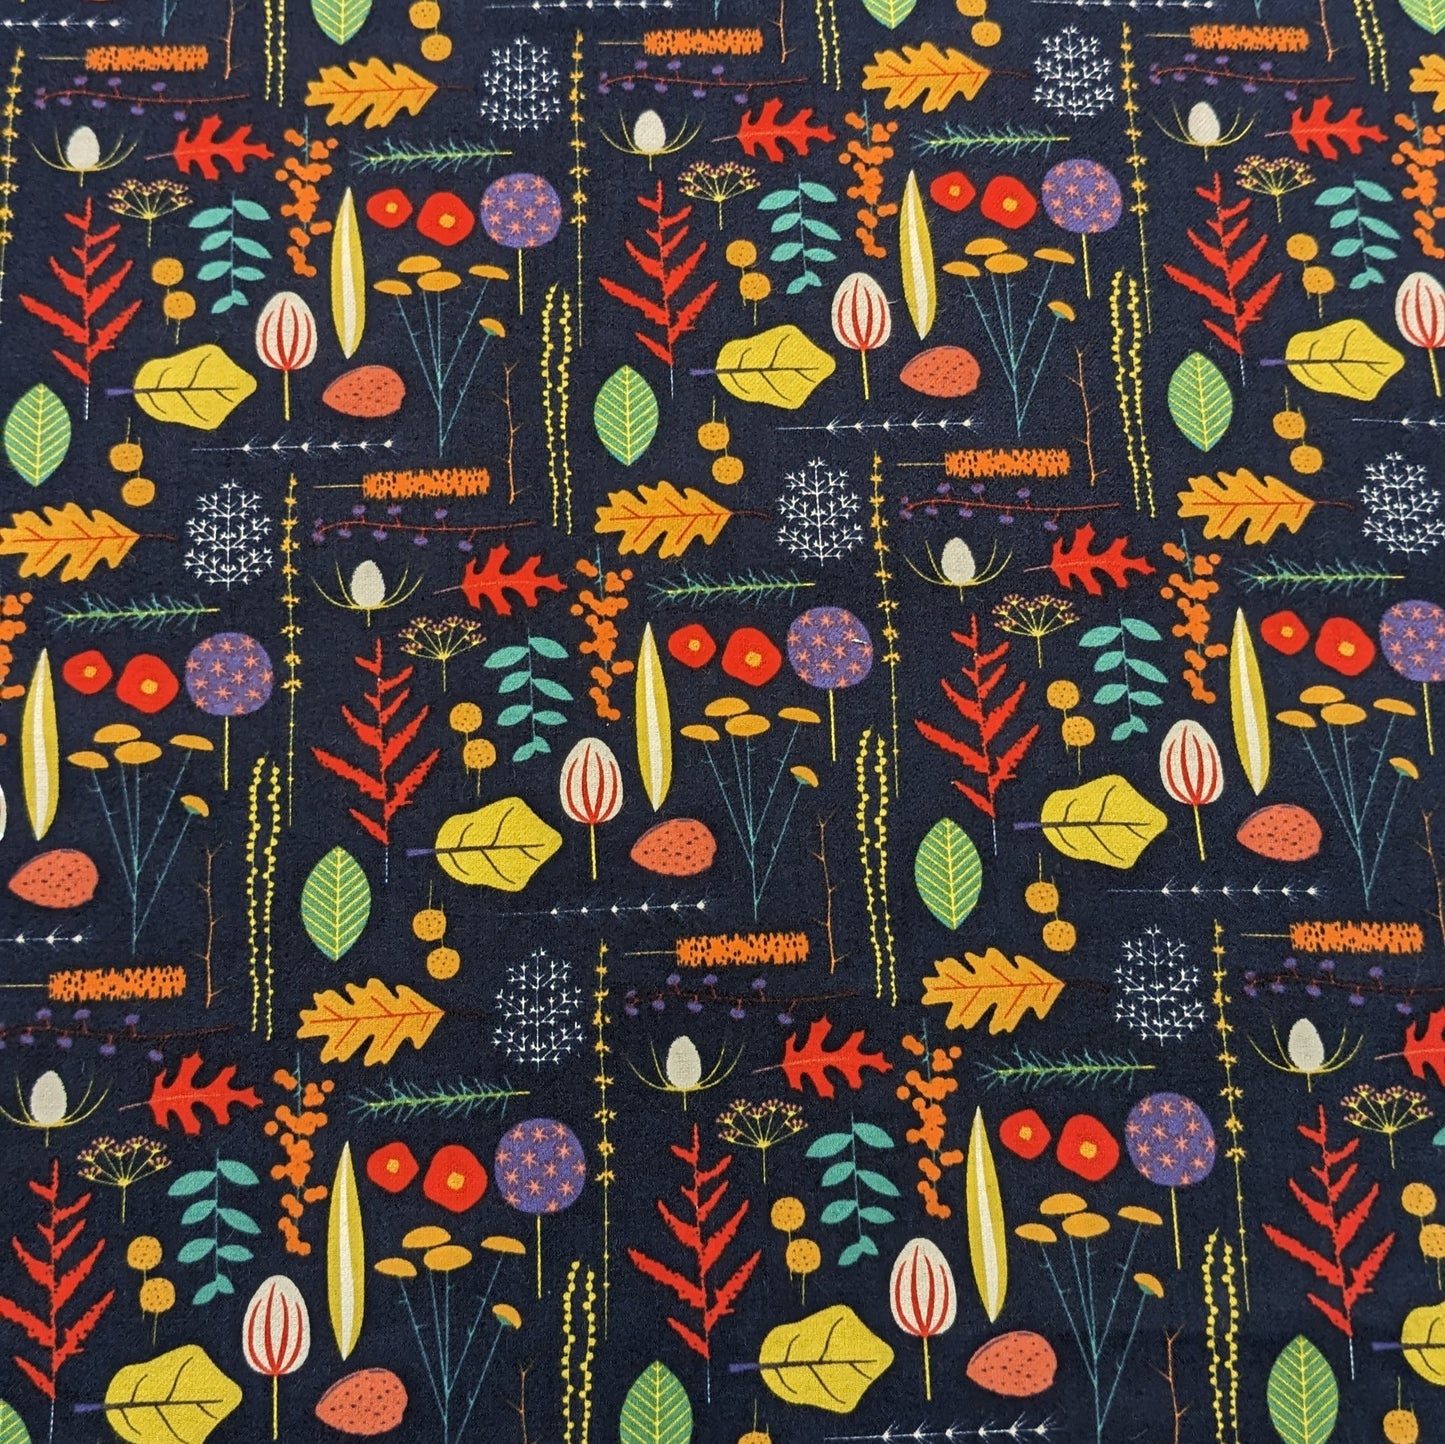 Brushed Cotton Fabric - Multi-Coloured Leaves - Navy